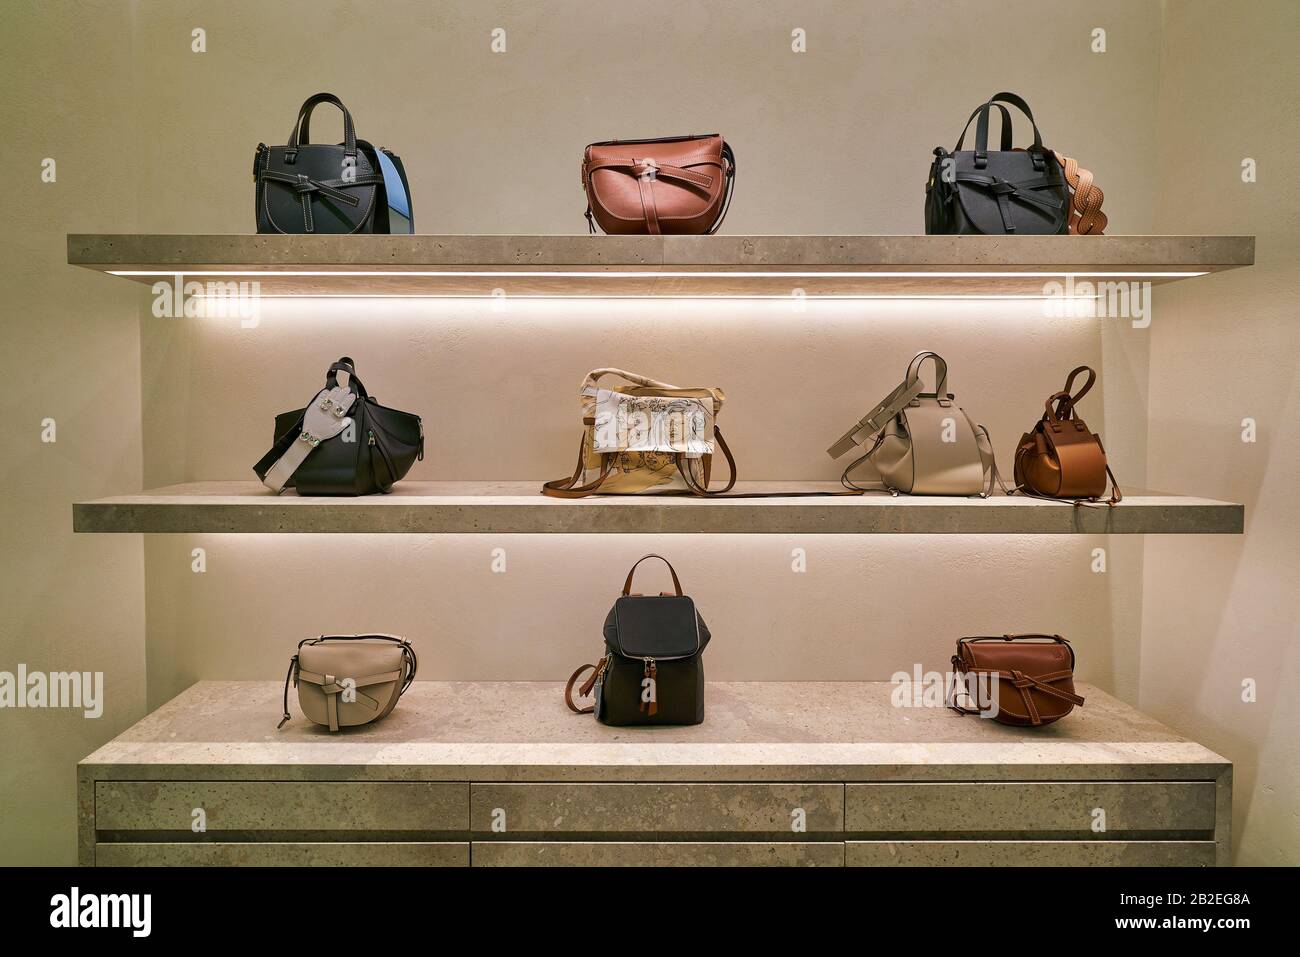 Luxury designer handbags on display in a Singapore shopping mall